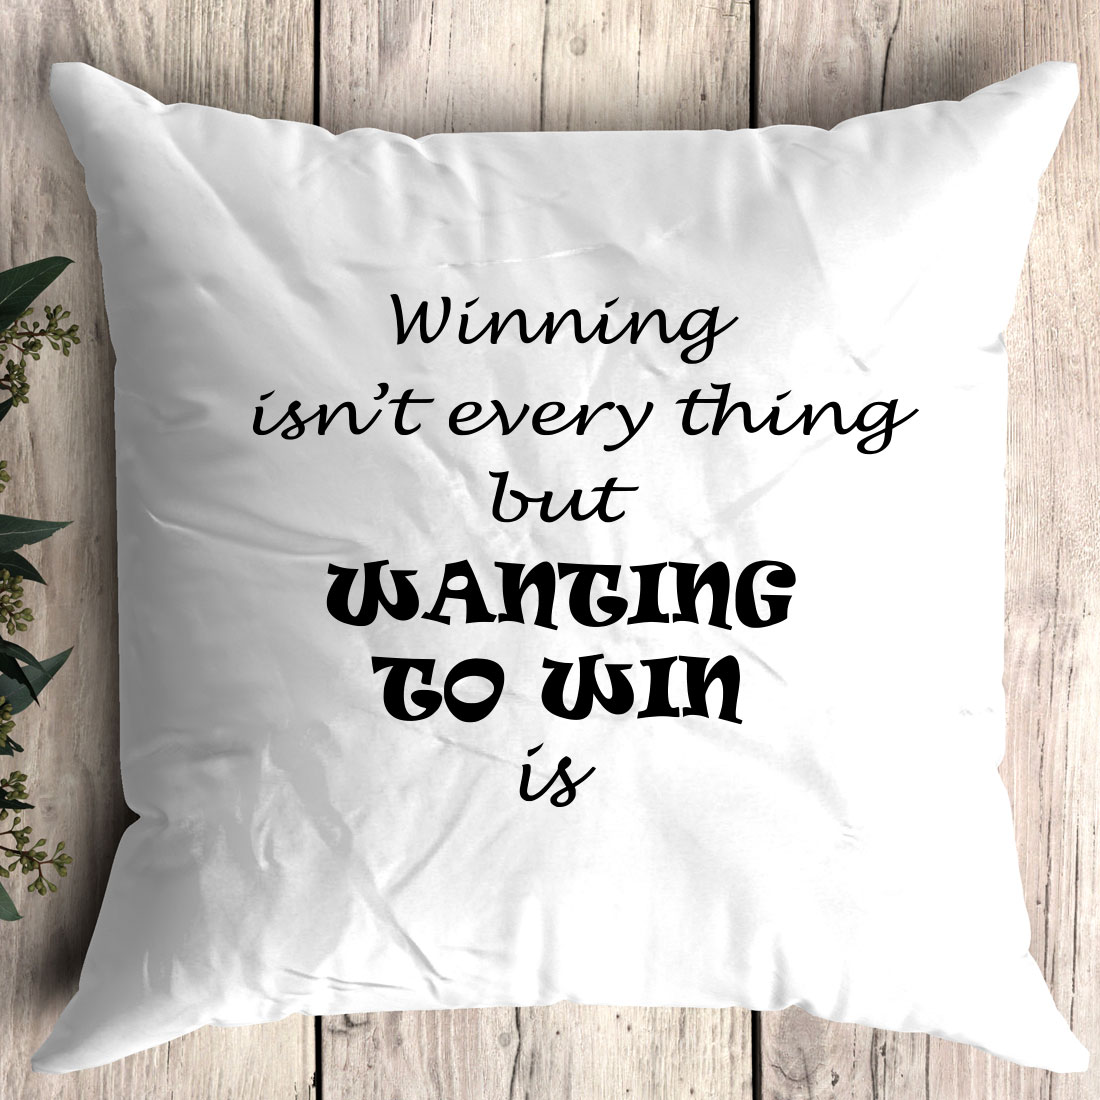 Pillow that says winning isn't every thing but wanting to win is.